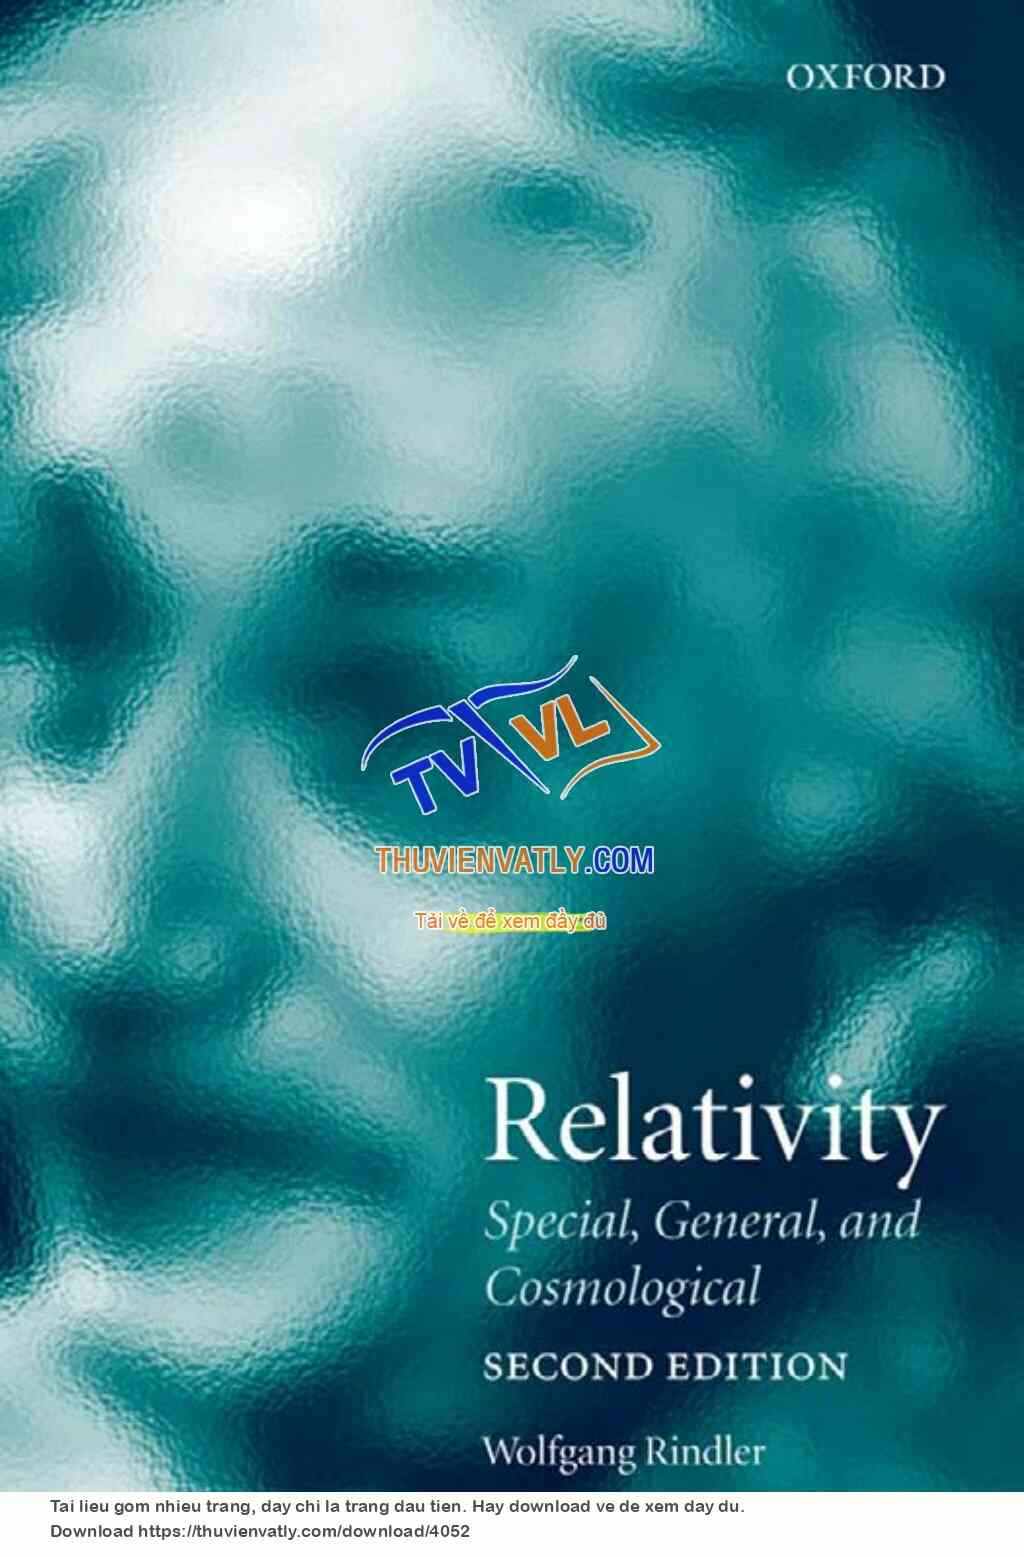 Relativity - Special, General, and Cosmological Theories